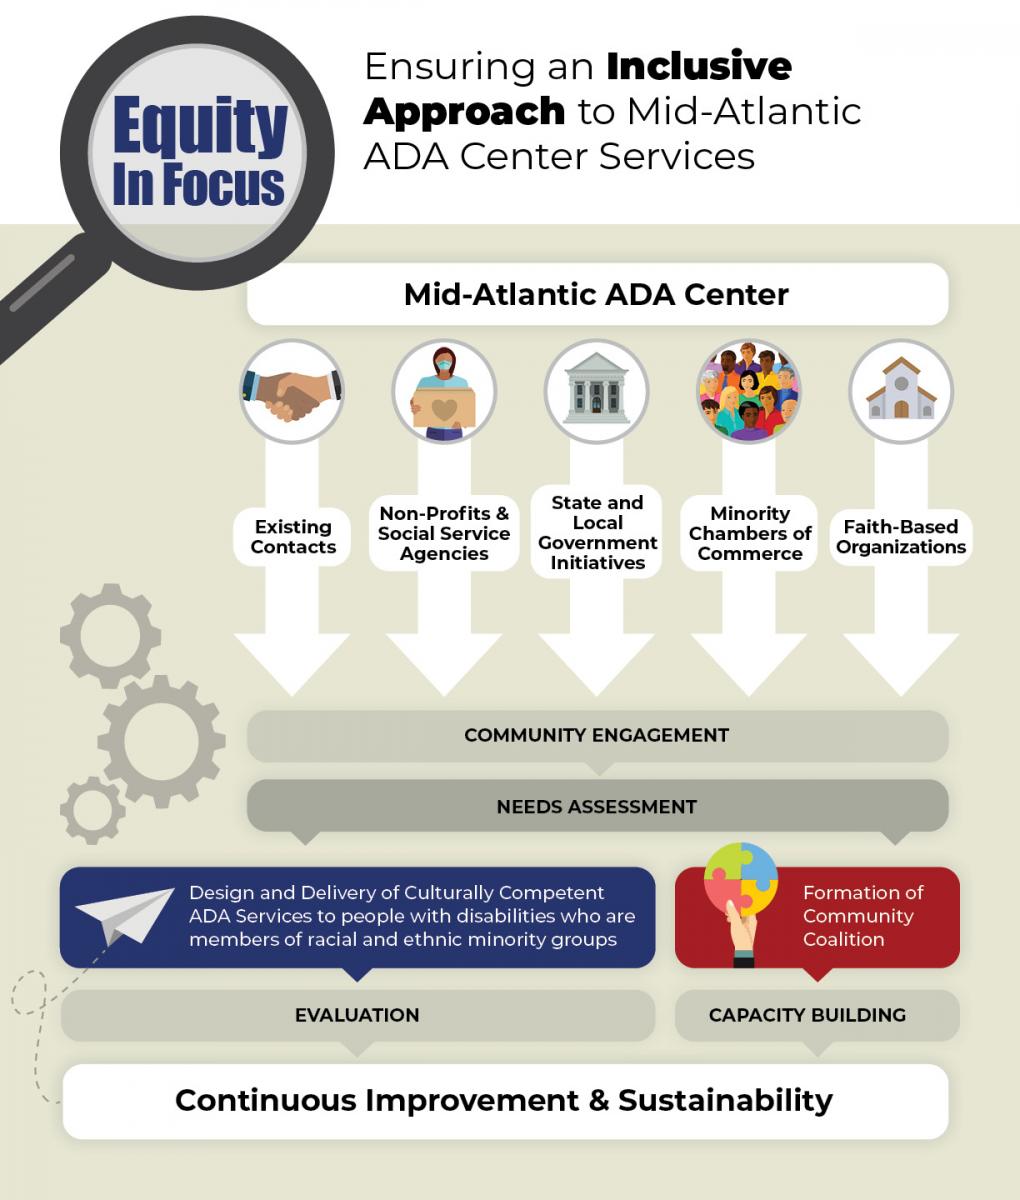 process infographic shows equity to ADA services through community engagement, needs assessment, and capacity building